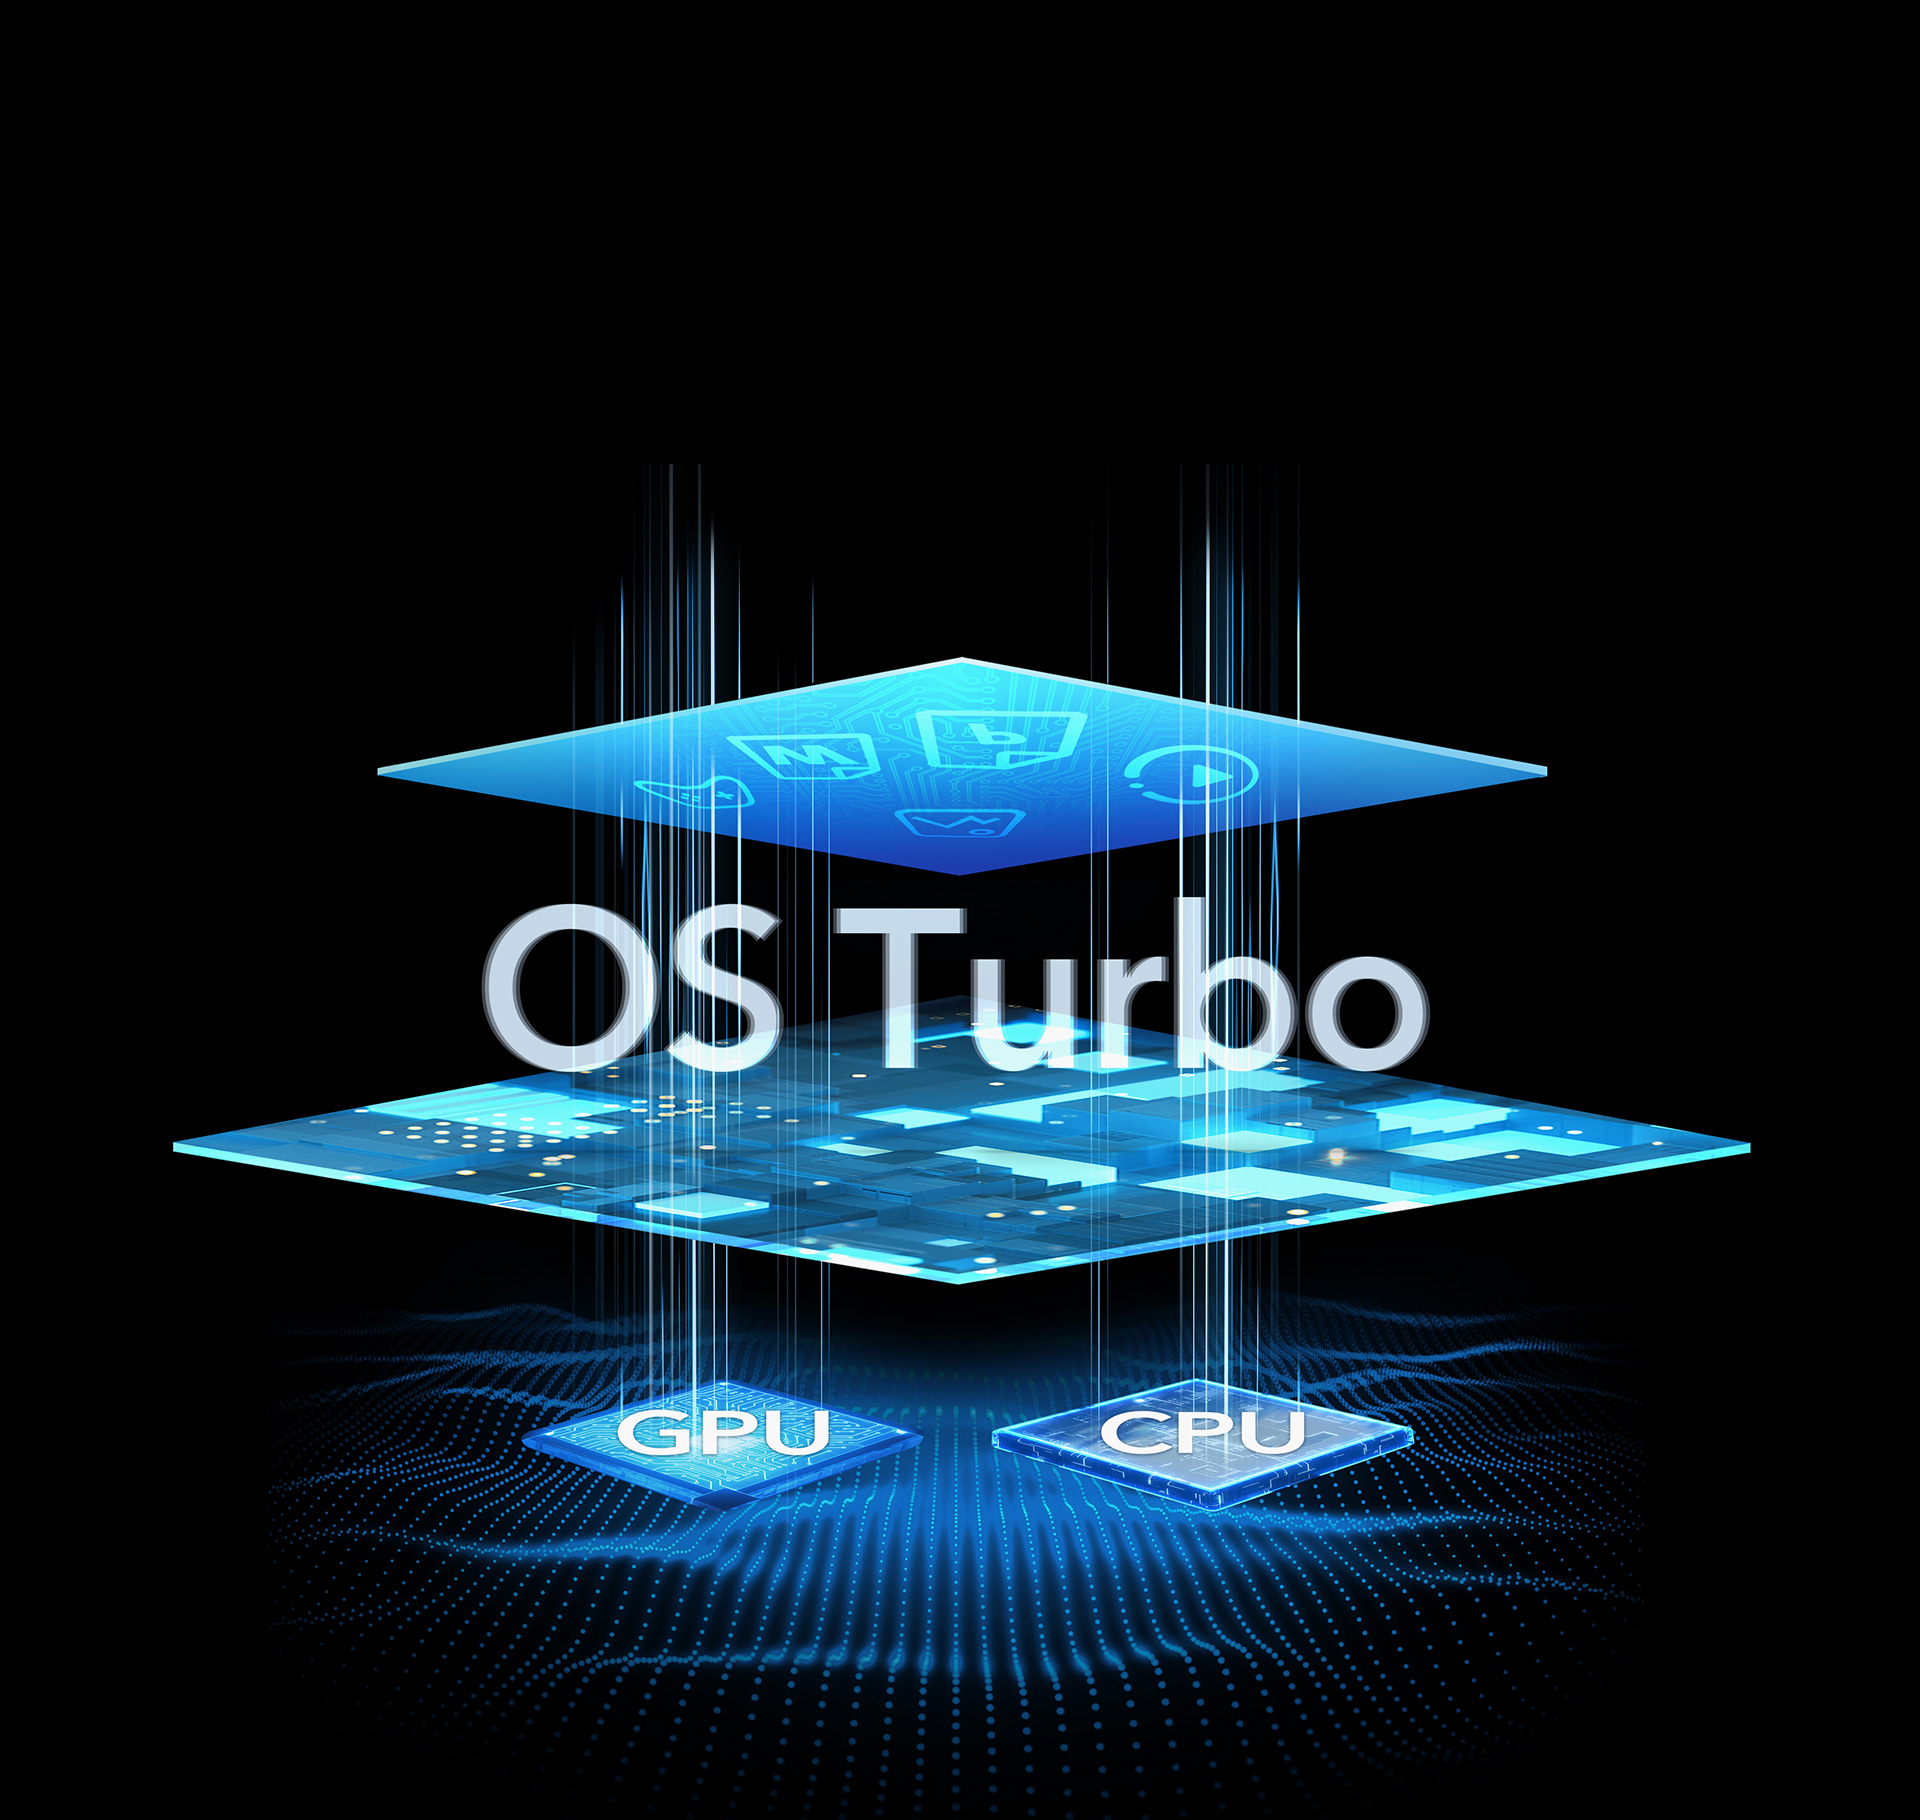 OS Turbo: An excellent balance of battery life and performance